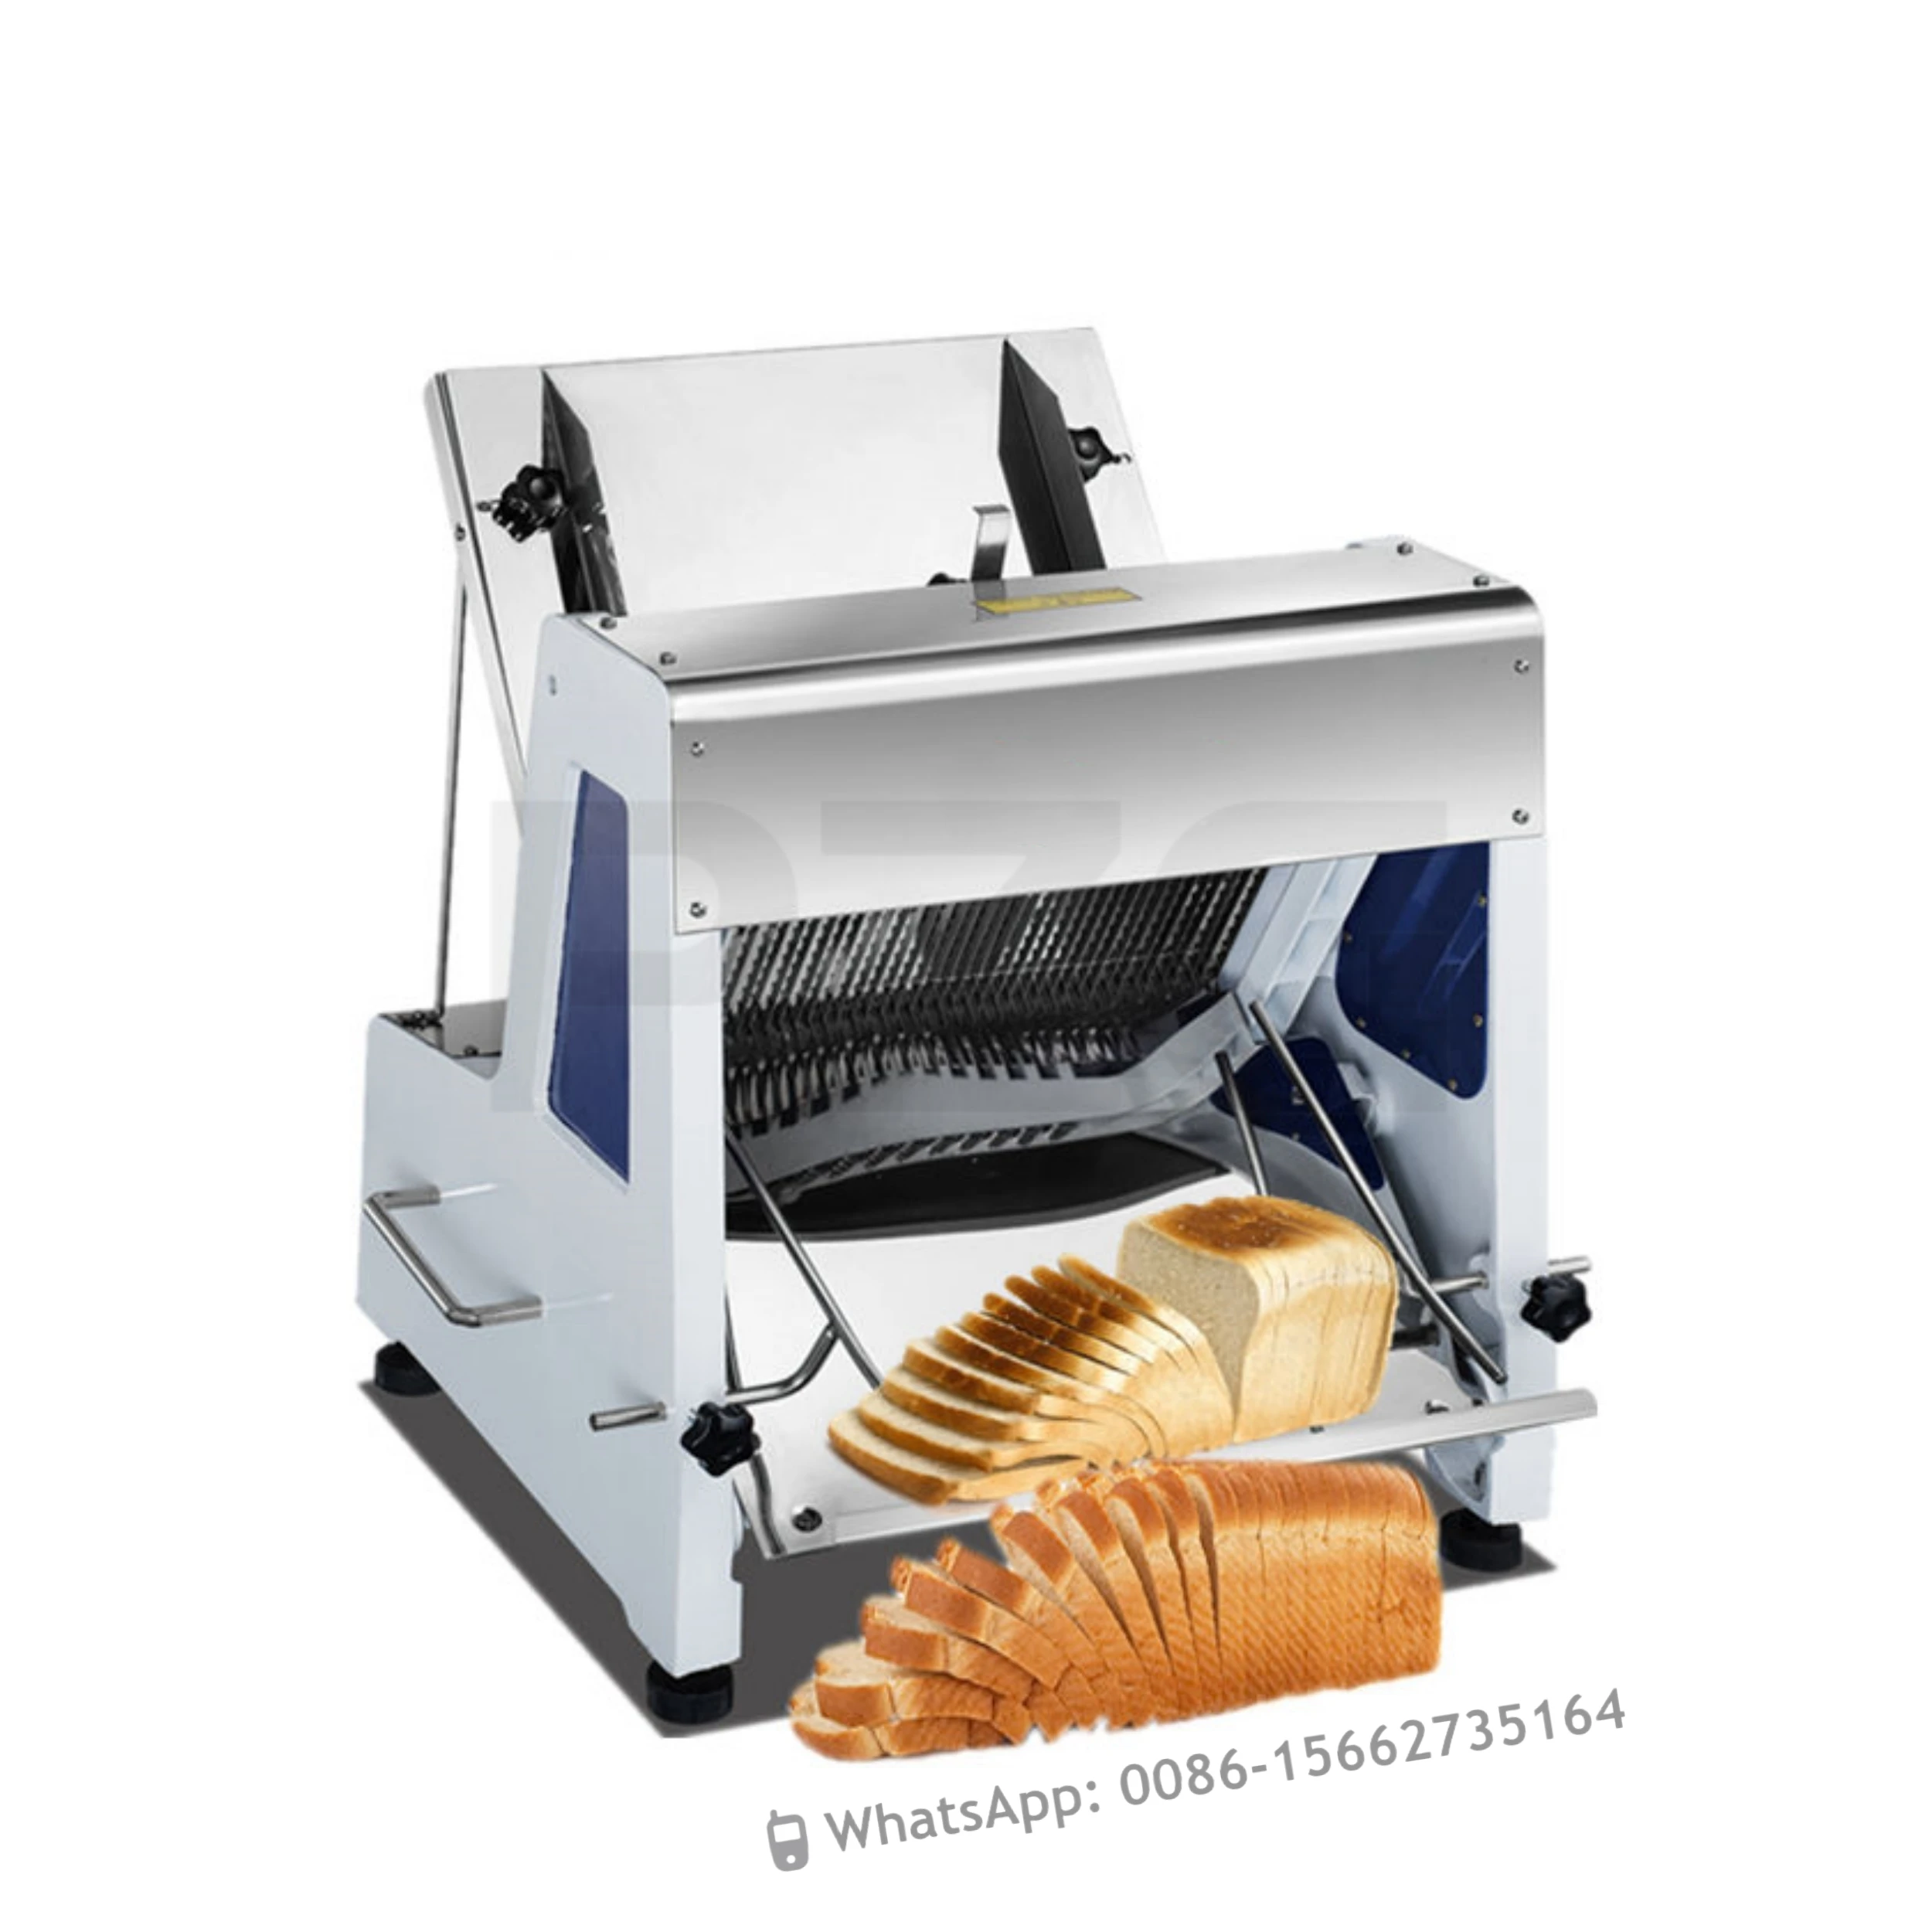 https://ae01.alicdn.com/kf/S1da2650dca3141869cb02b18a8b5de19D/Adjustable-Bread-Loaf-Slicer-31pcs-Toast-Bread-Slicing-Machine-Loaf-Bread-Cutting-Machine-Commercial-Bakery-Equipment.jpg